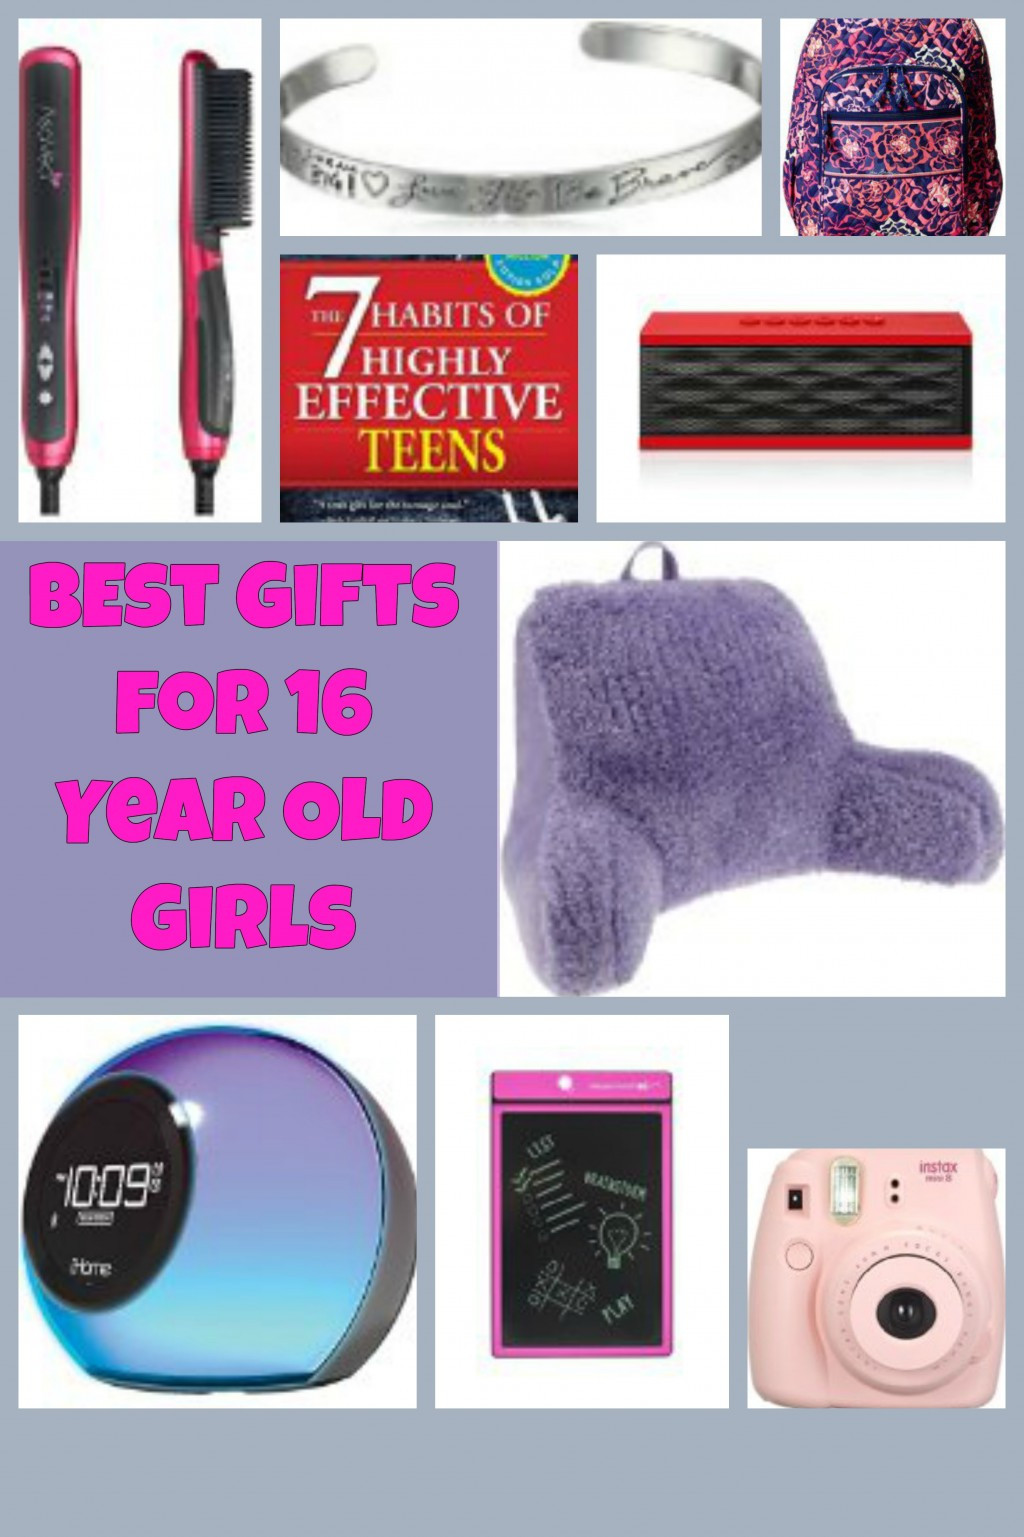 Christmas Gift Ideas For 16 Yr Old Girls
 Best Gifts for 16 Year Old Girls Christmas and Birthday